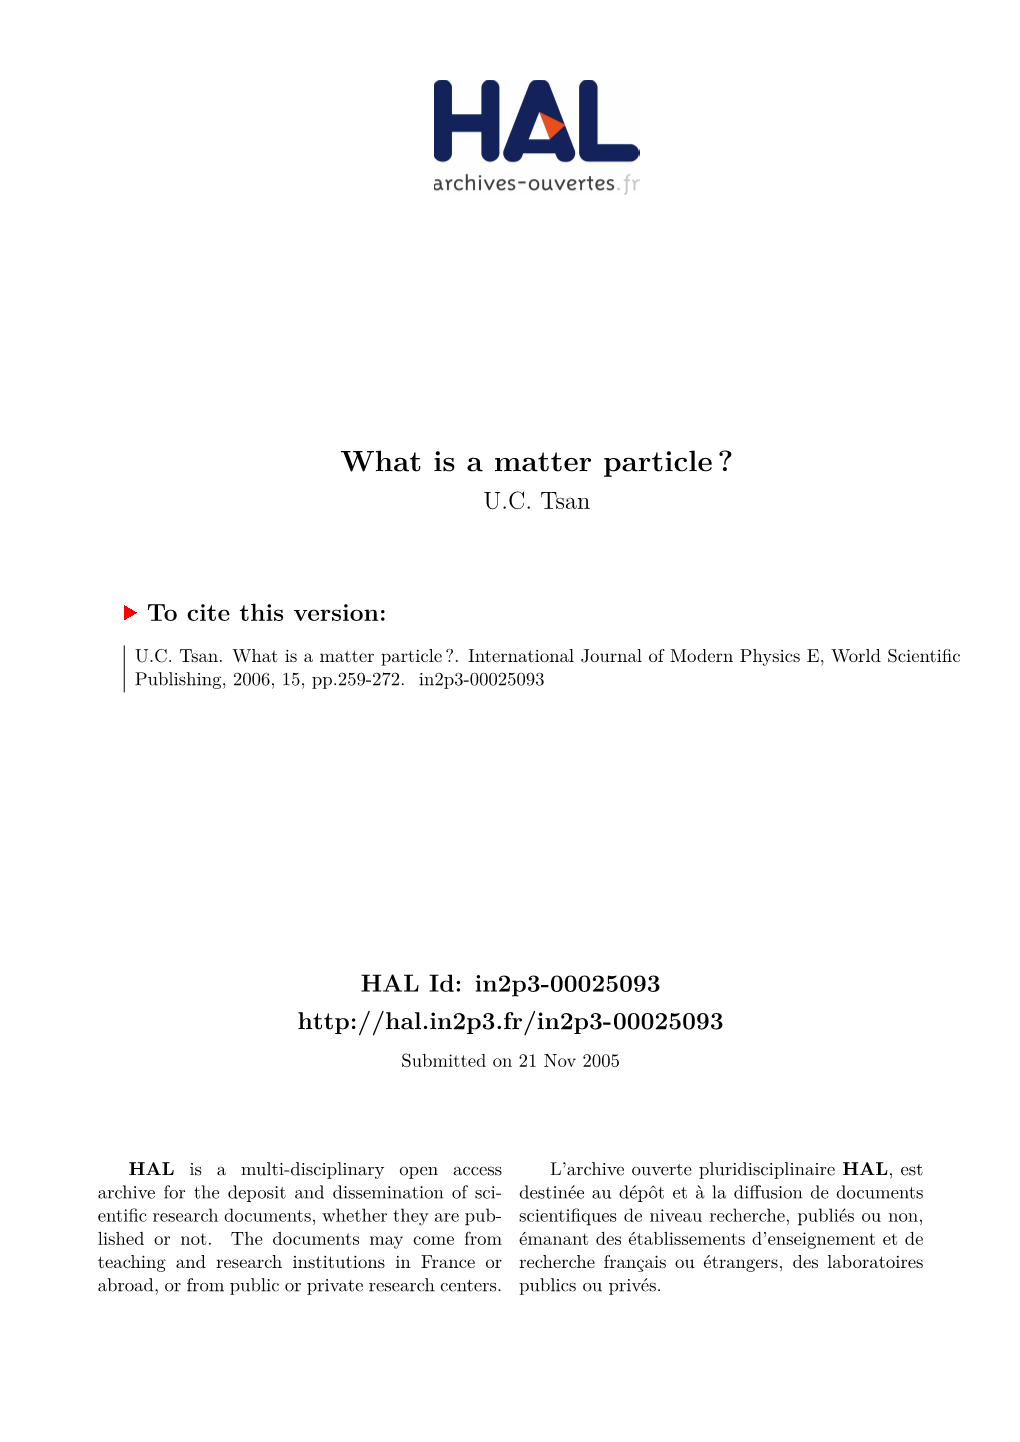 What Is a Matter Particle?